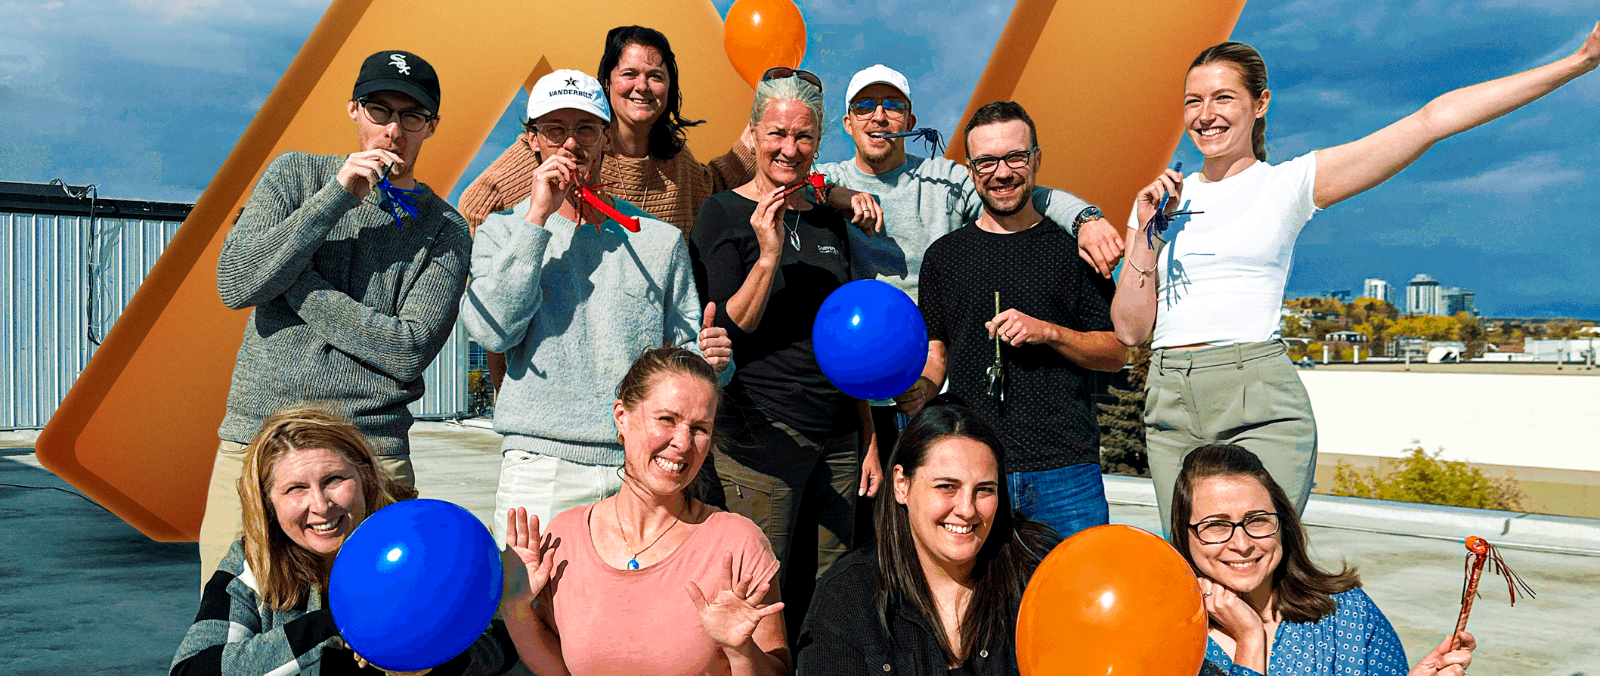 The Konstruct Digital team celebrating with balloons and party blowers